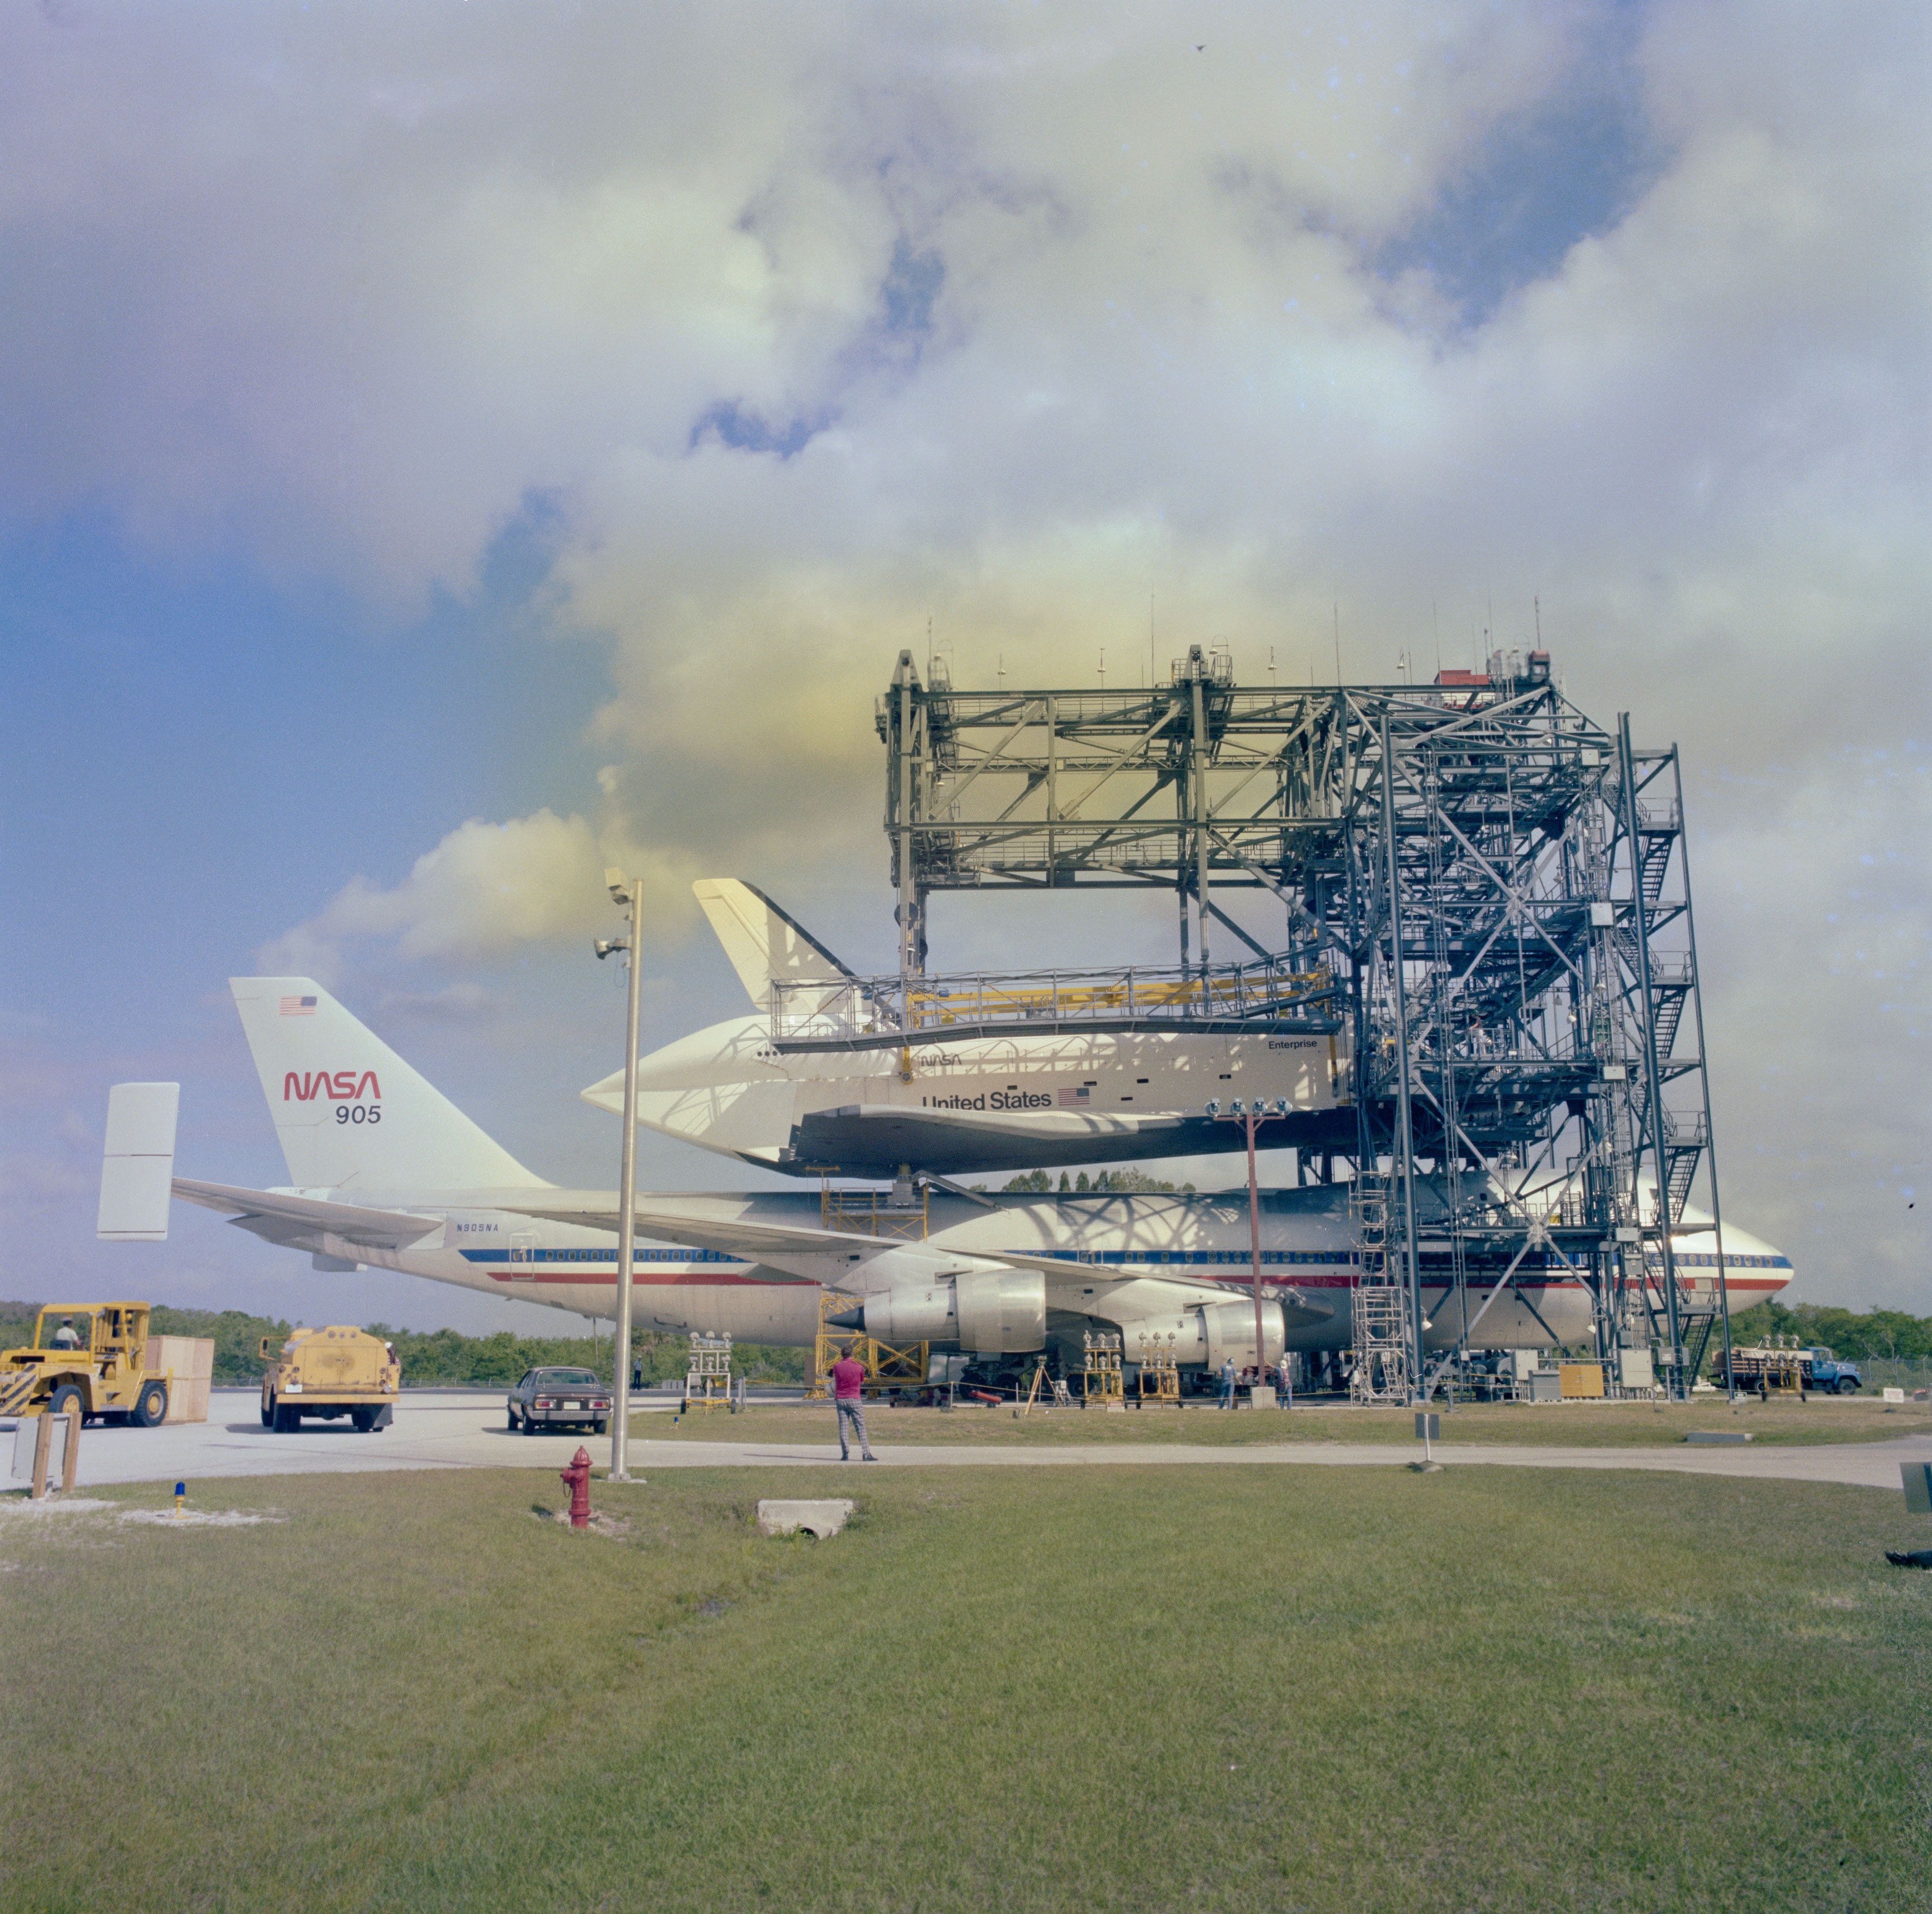 Enterprise atop its Shuttle Carrier Aircraft (SCA) touches down on the runway at NASA's Kennedy Space Center in Florida